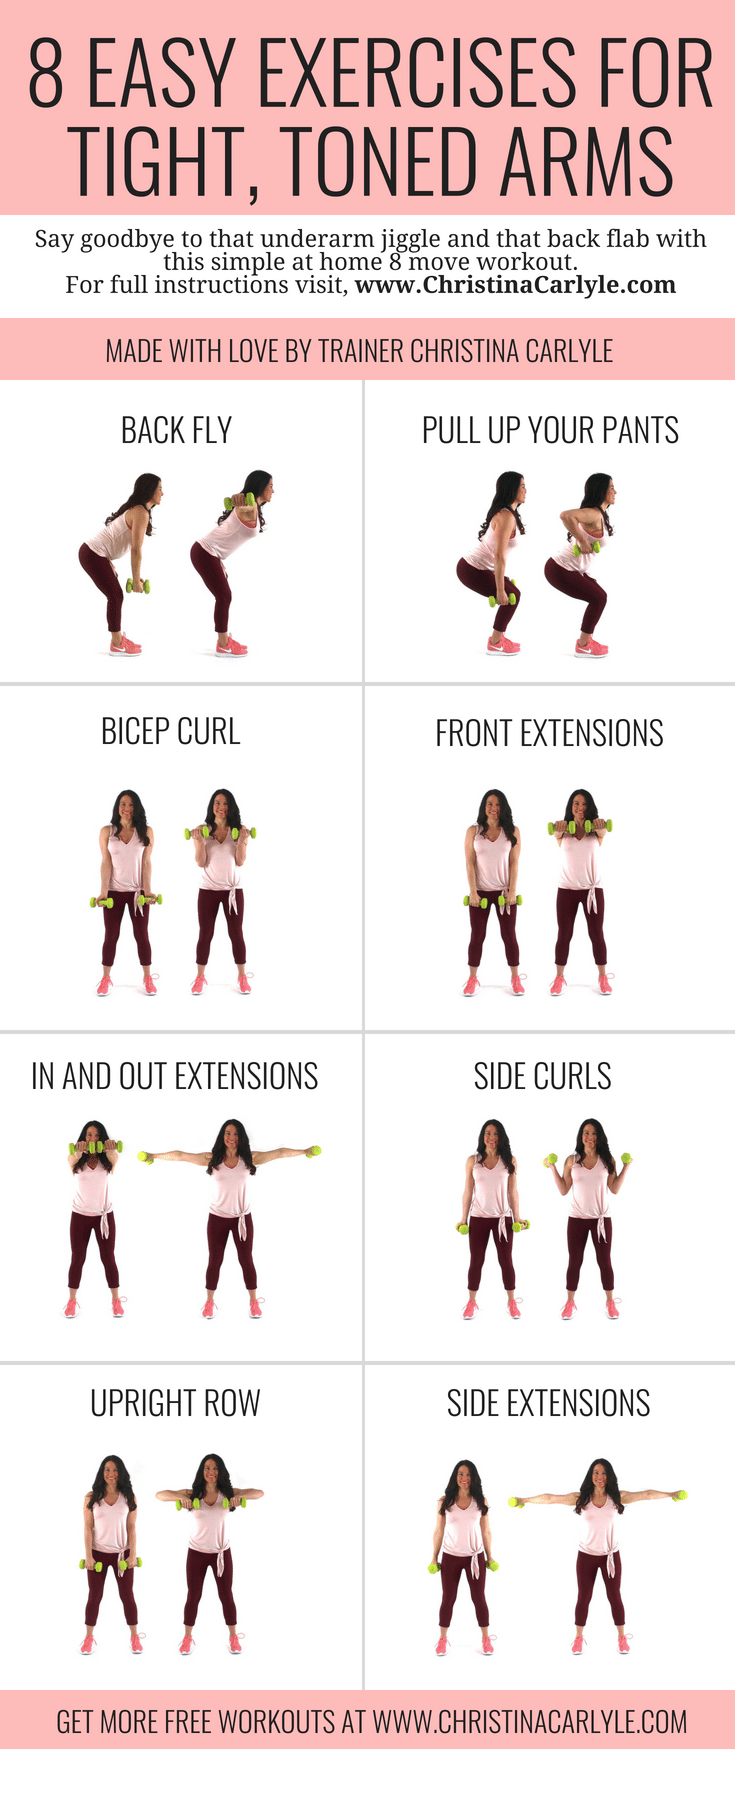 MY Wall Decors on X: Arm Exercises with Weights for Women that